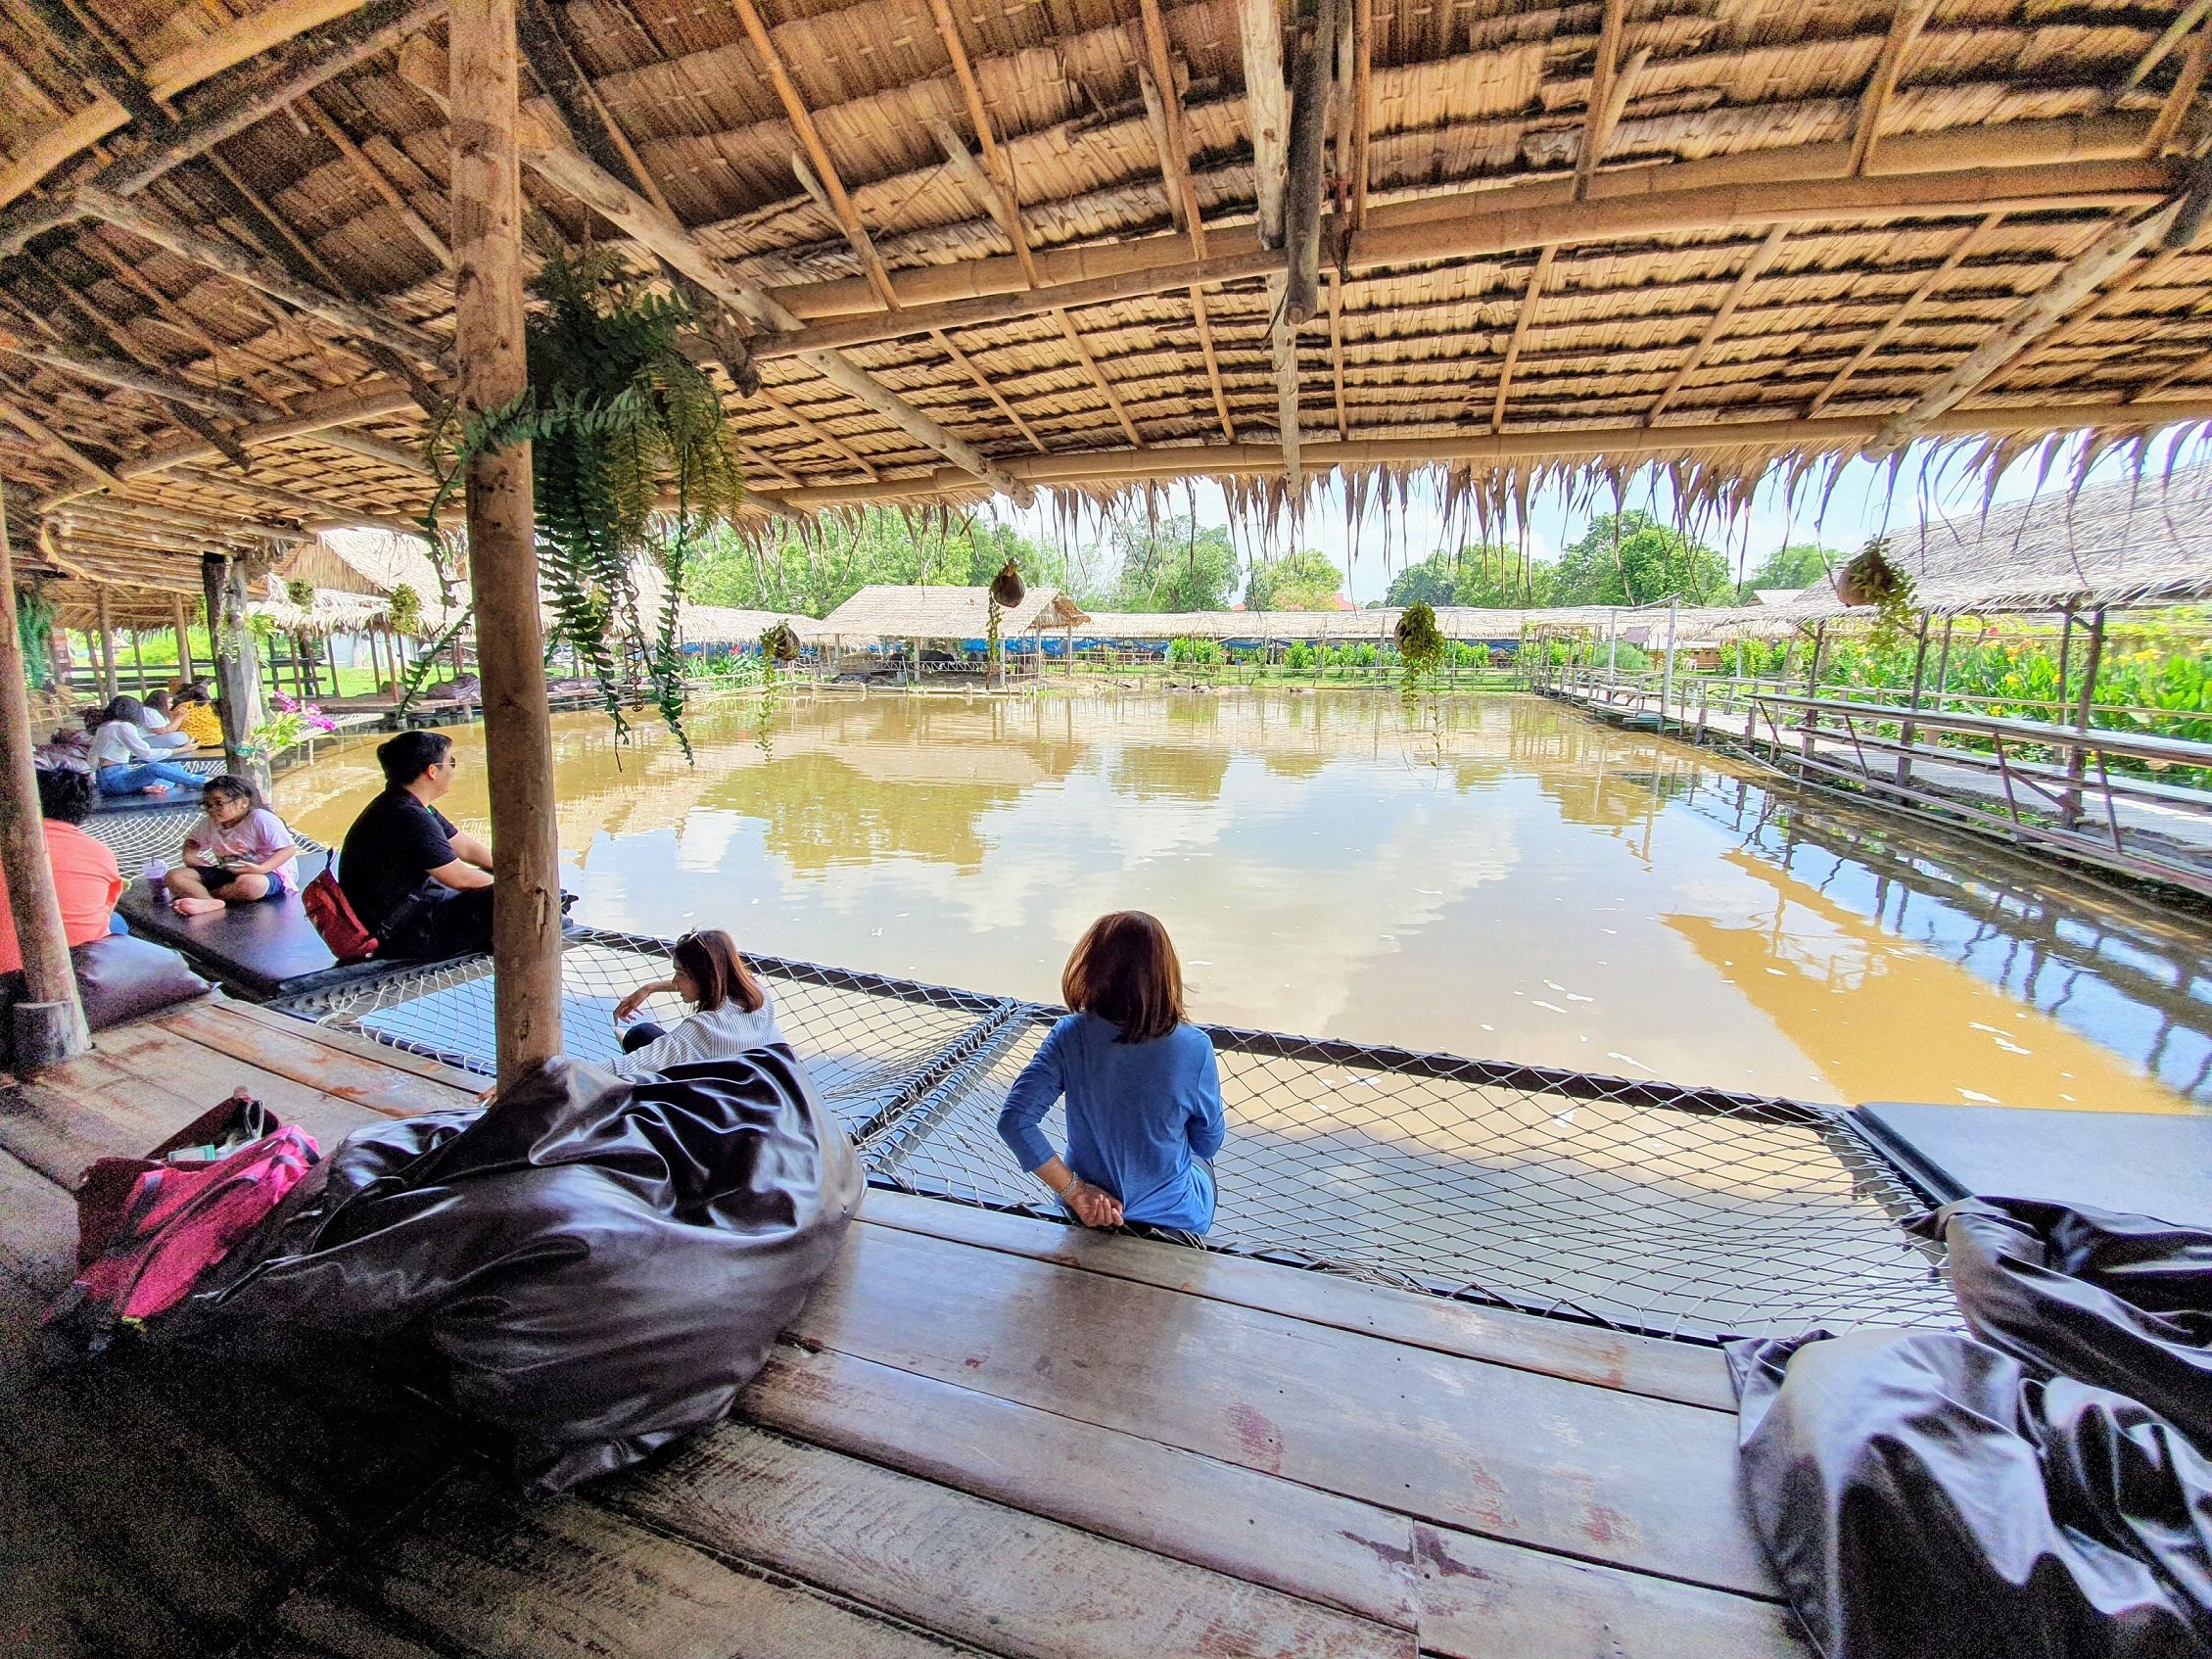 Visitors are enjoying their drinks and watching buffaloes soaking in the pond, Buffalo Village